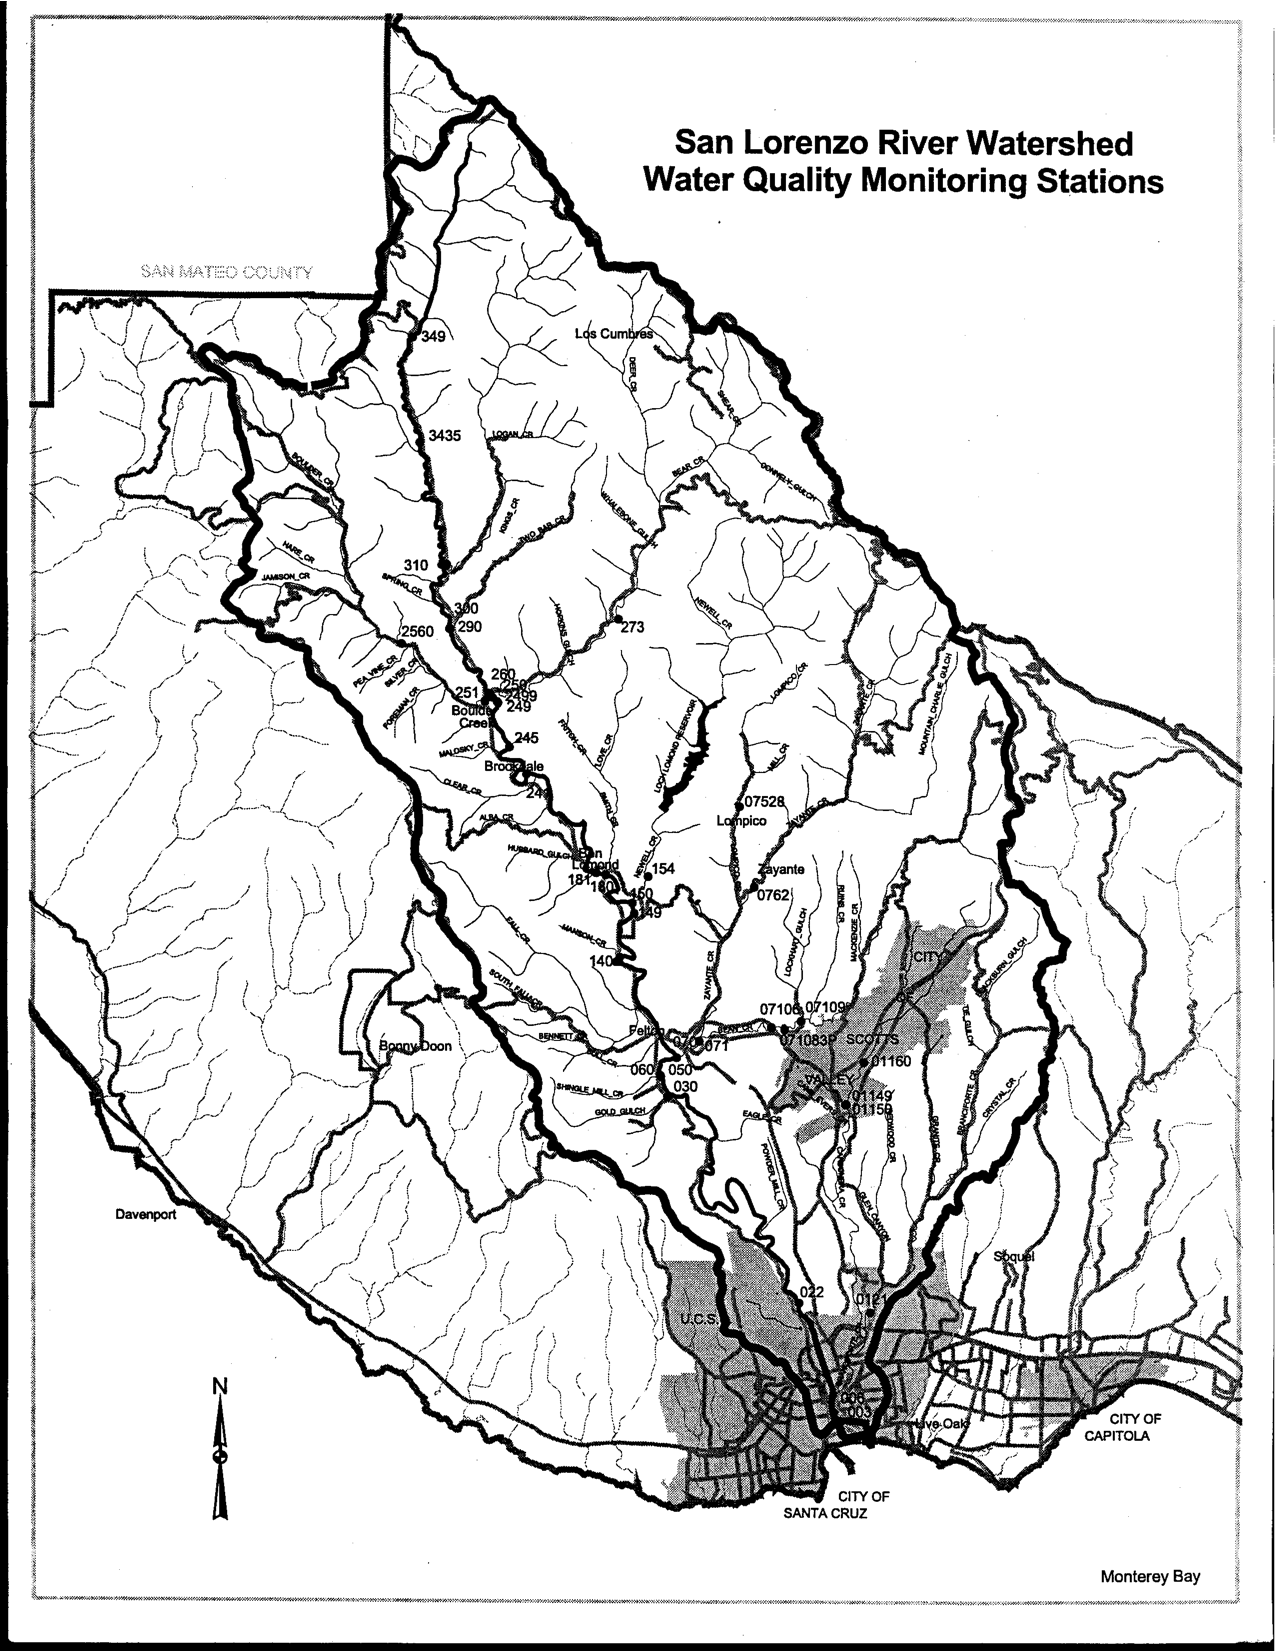 San lorenzo river watershed water quality monitoring stations.png